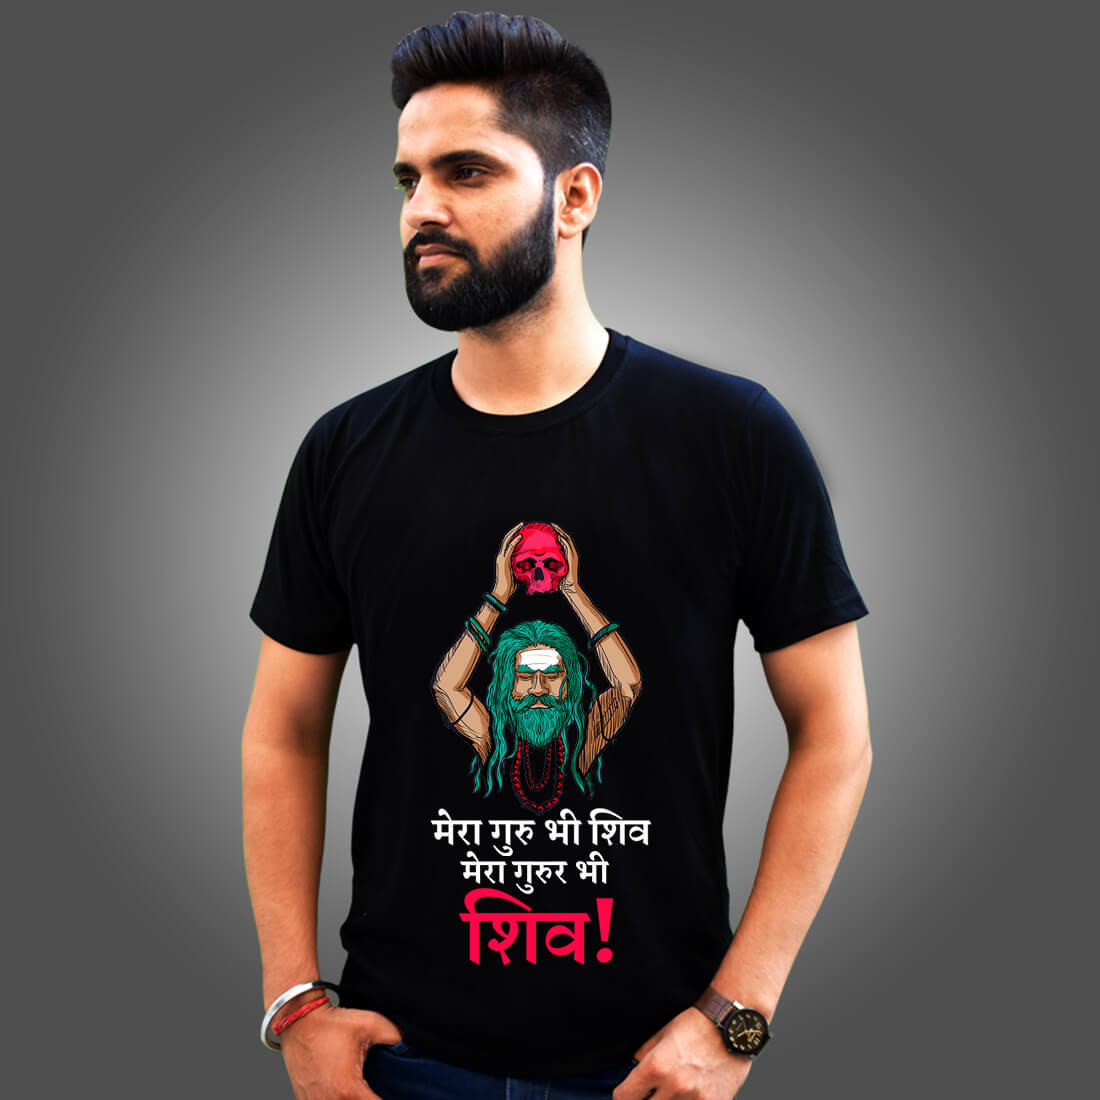 Lord Shiva Quotes Printed Black T-Shirt for Men